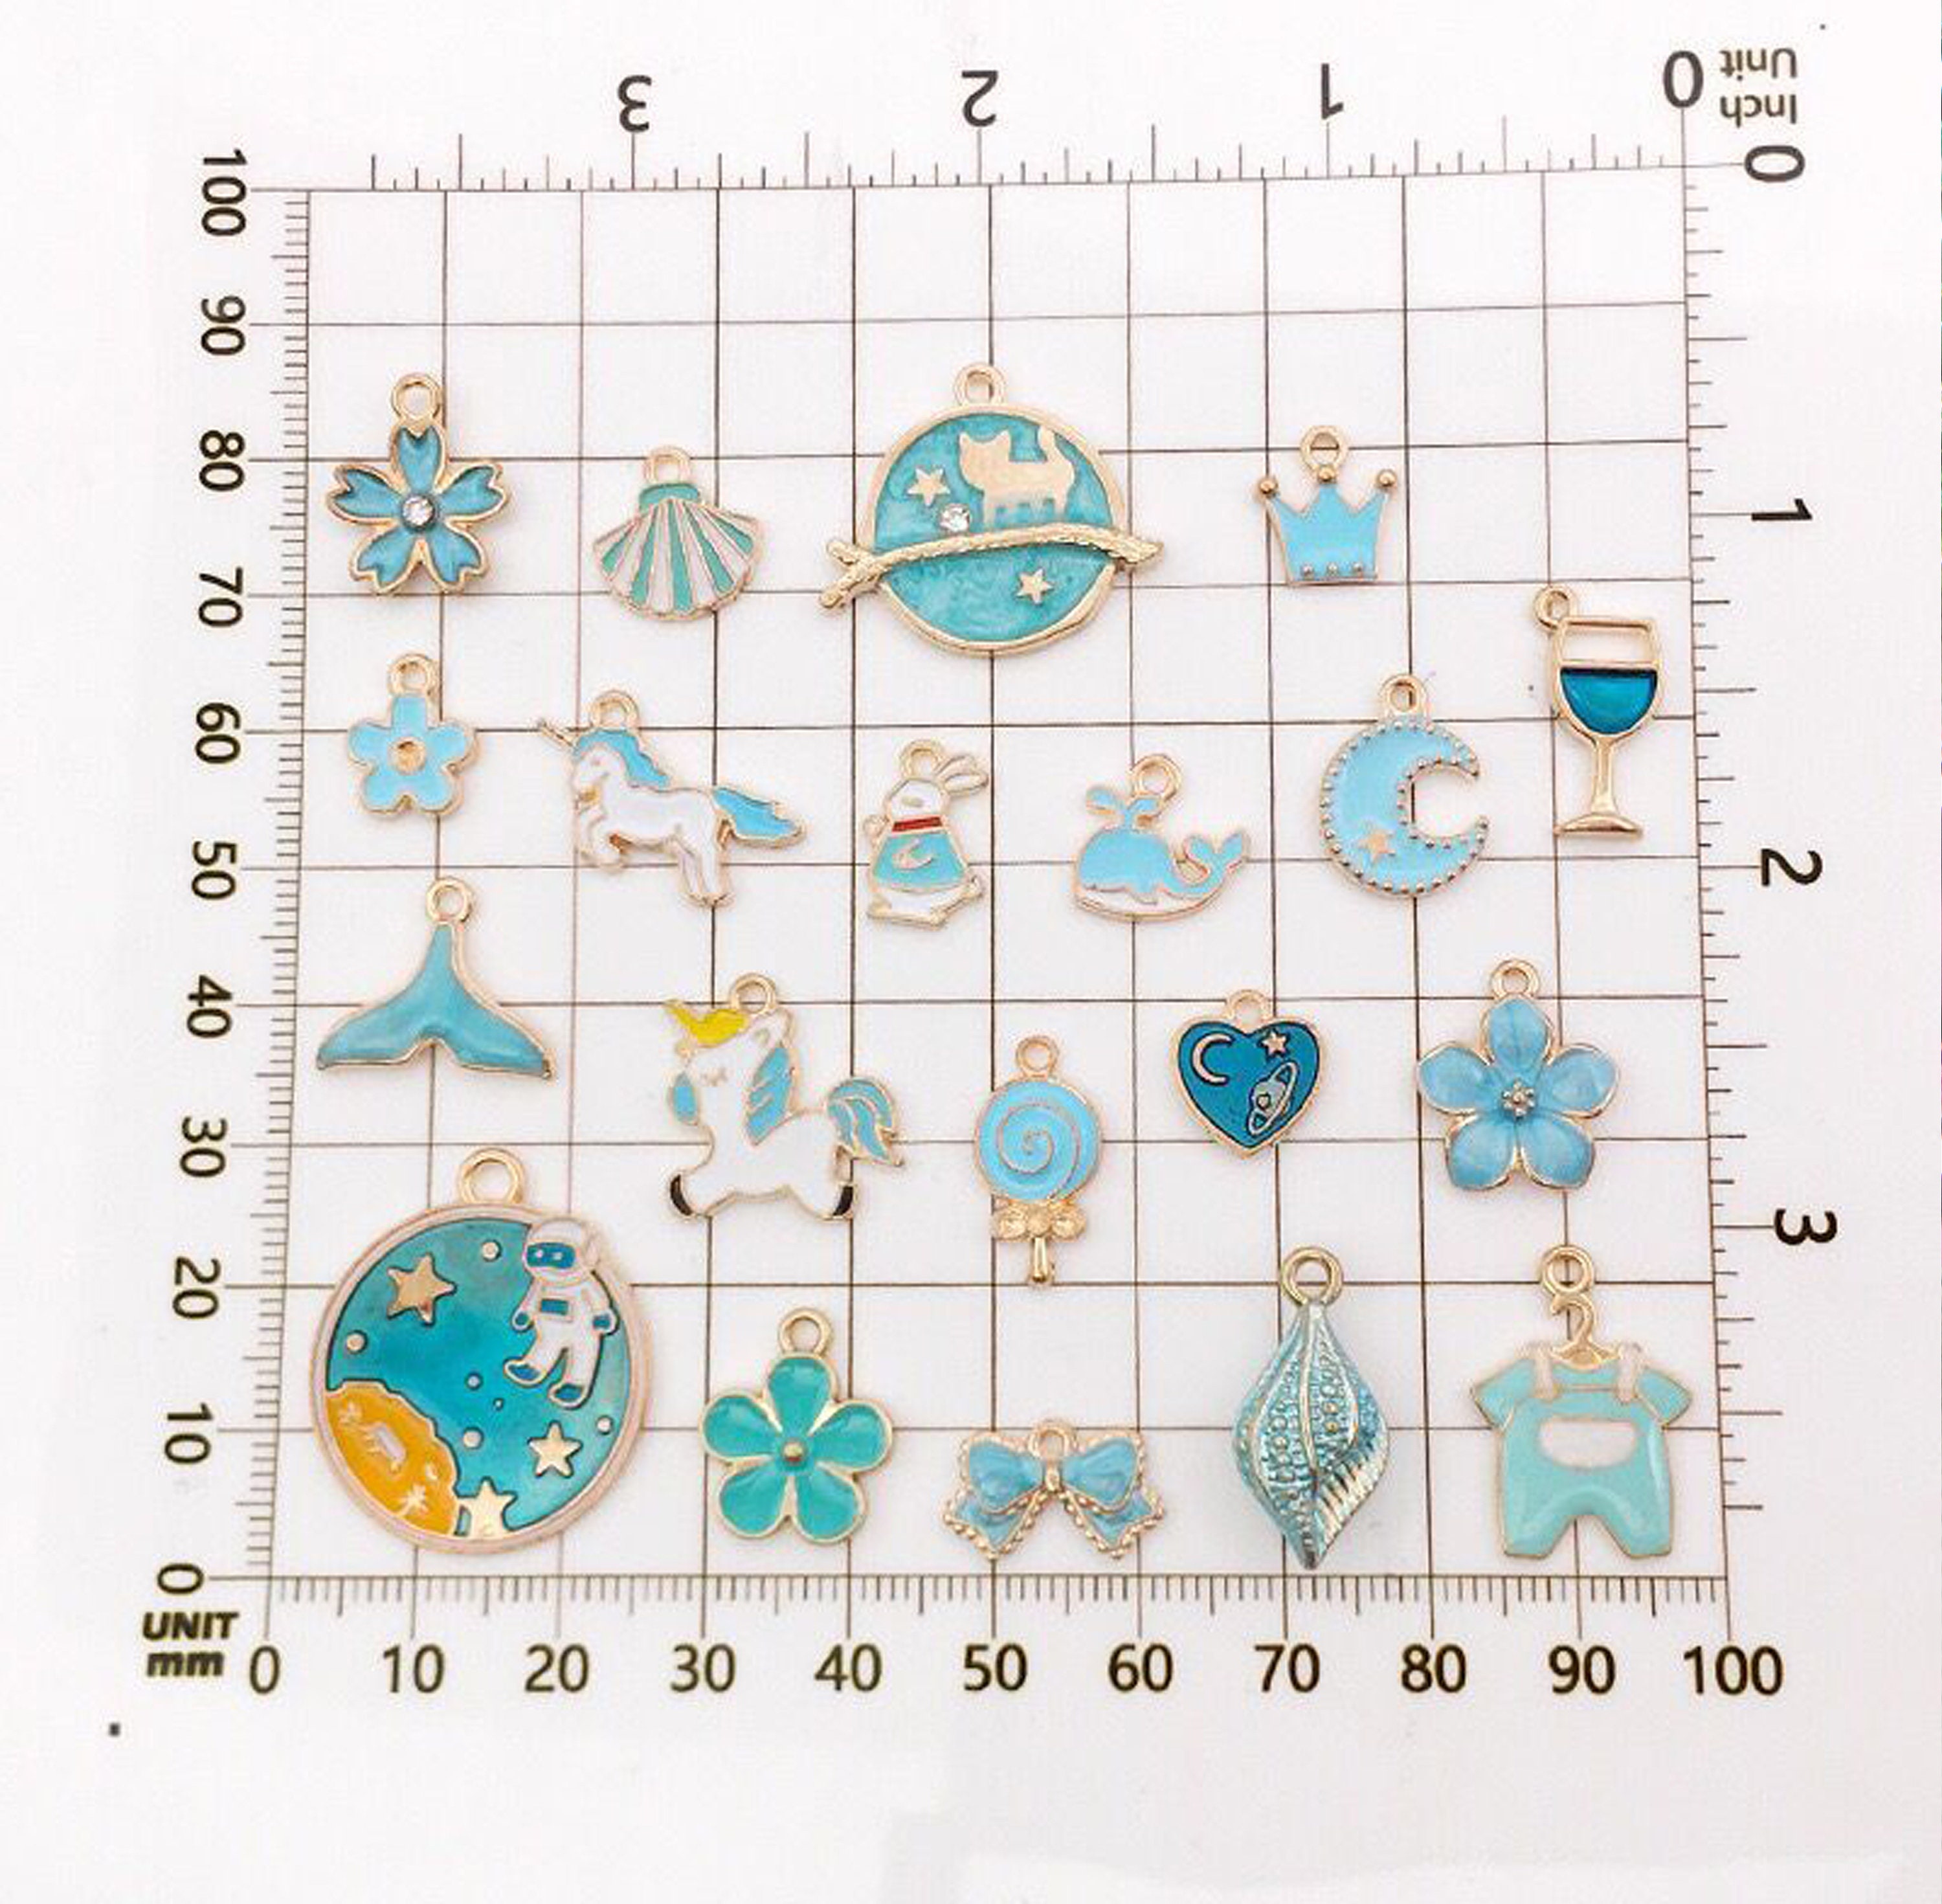 Collection 23 Enamel Charms, Assorted Charms, Gold Plated Alloy